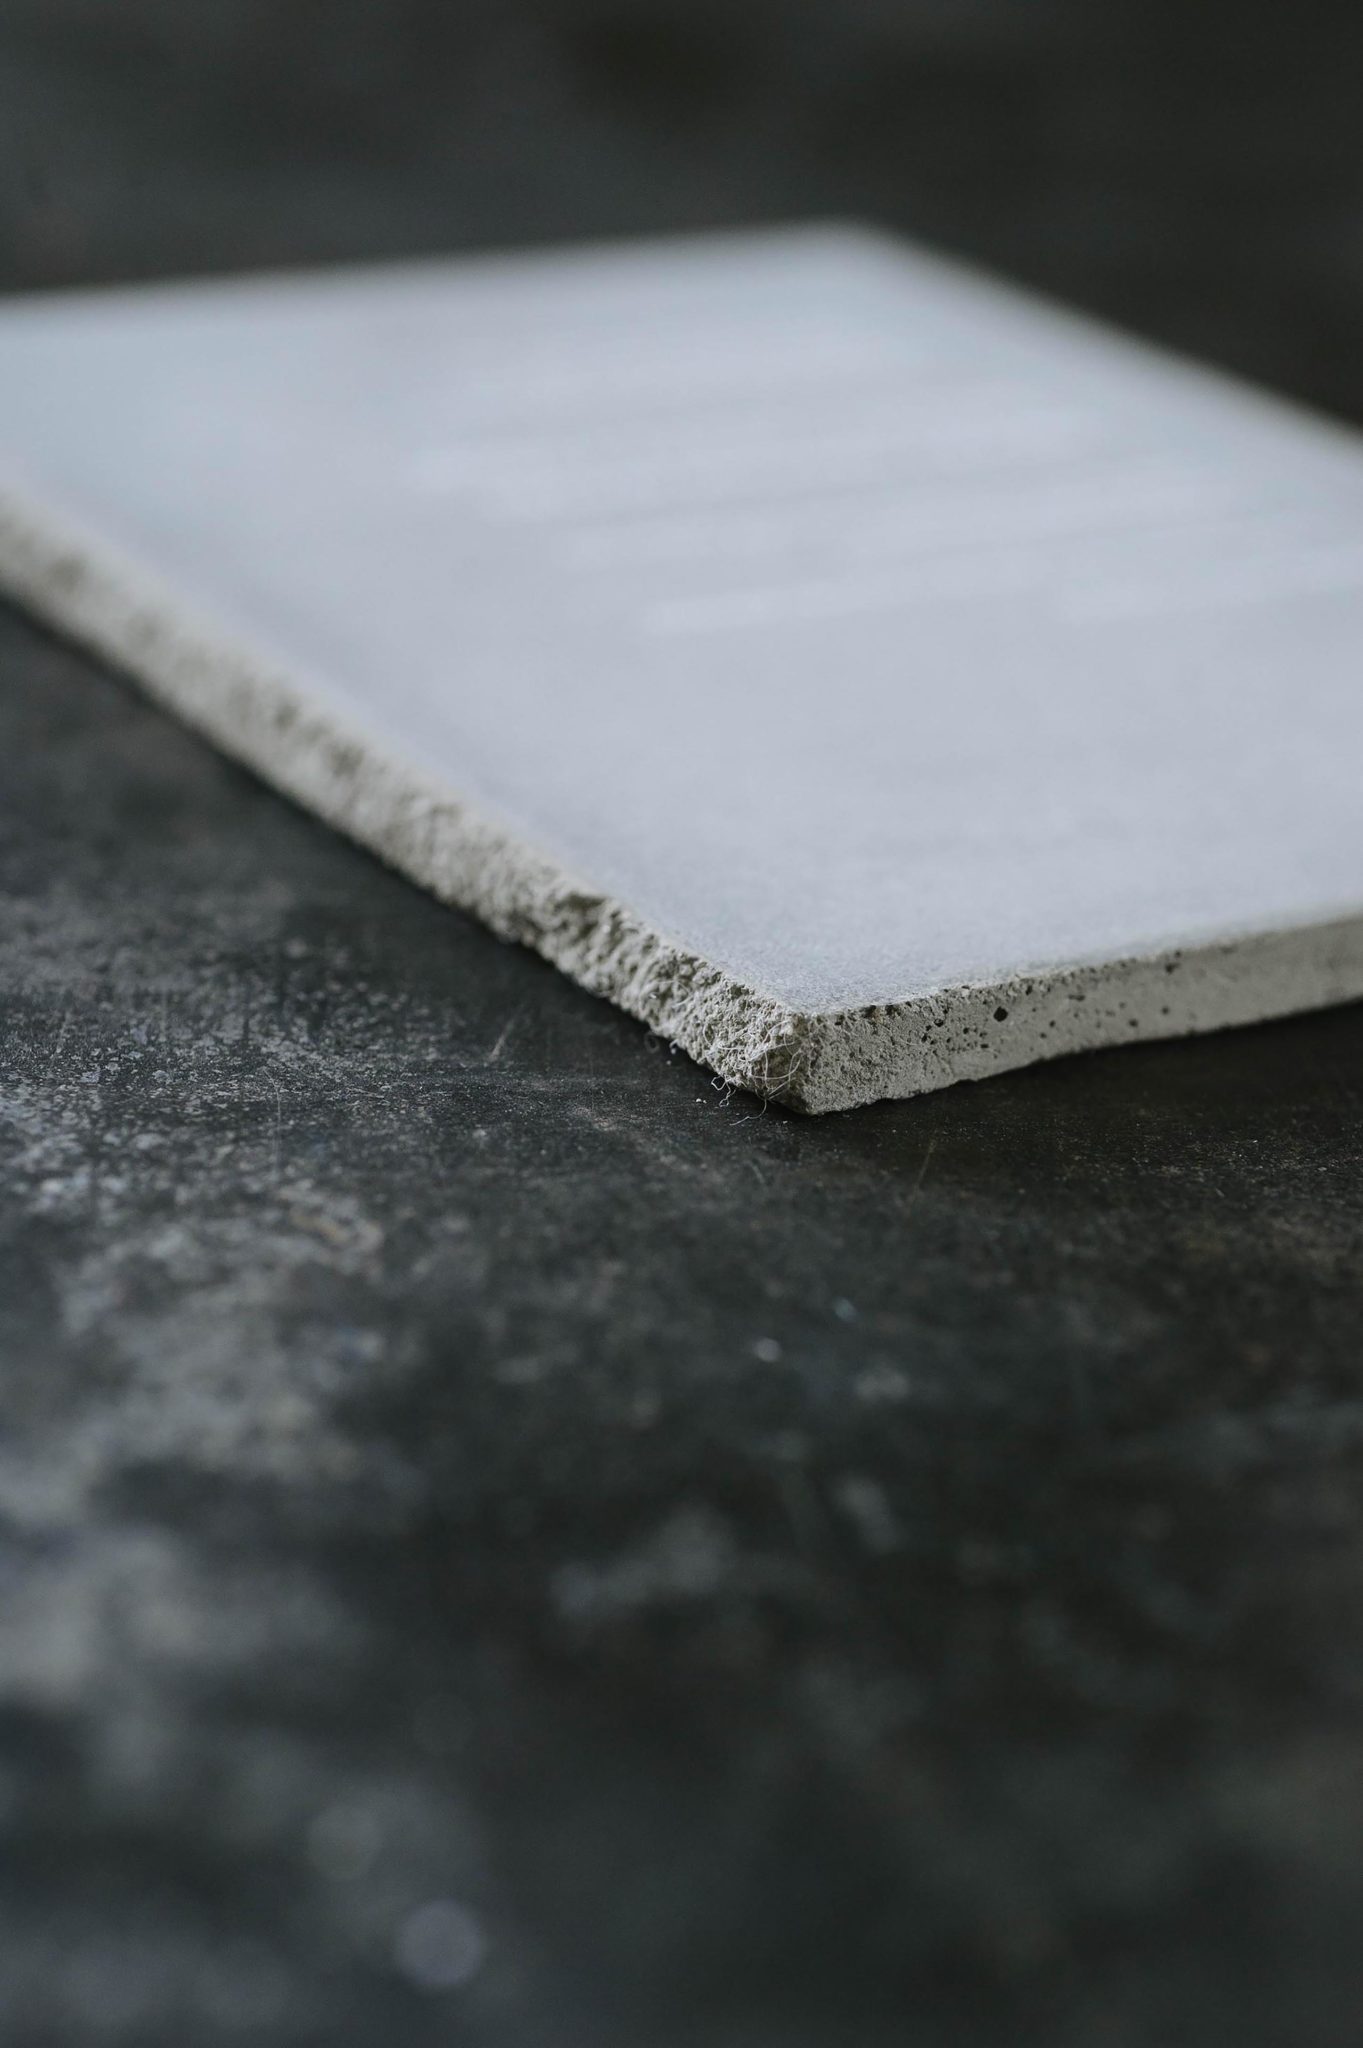 Concrete (screenprinted) and Wood (laser-engraved) Luxury Wedding Invitation from A Fine Press